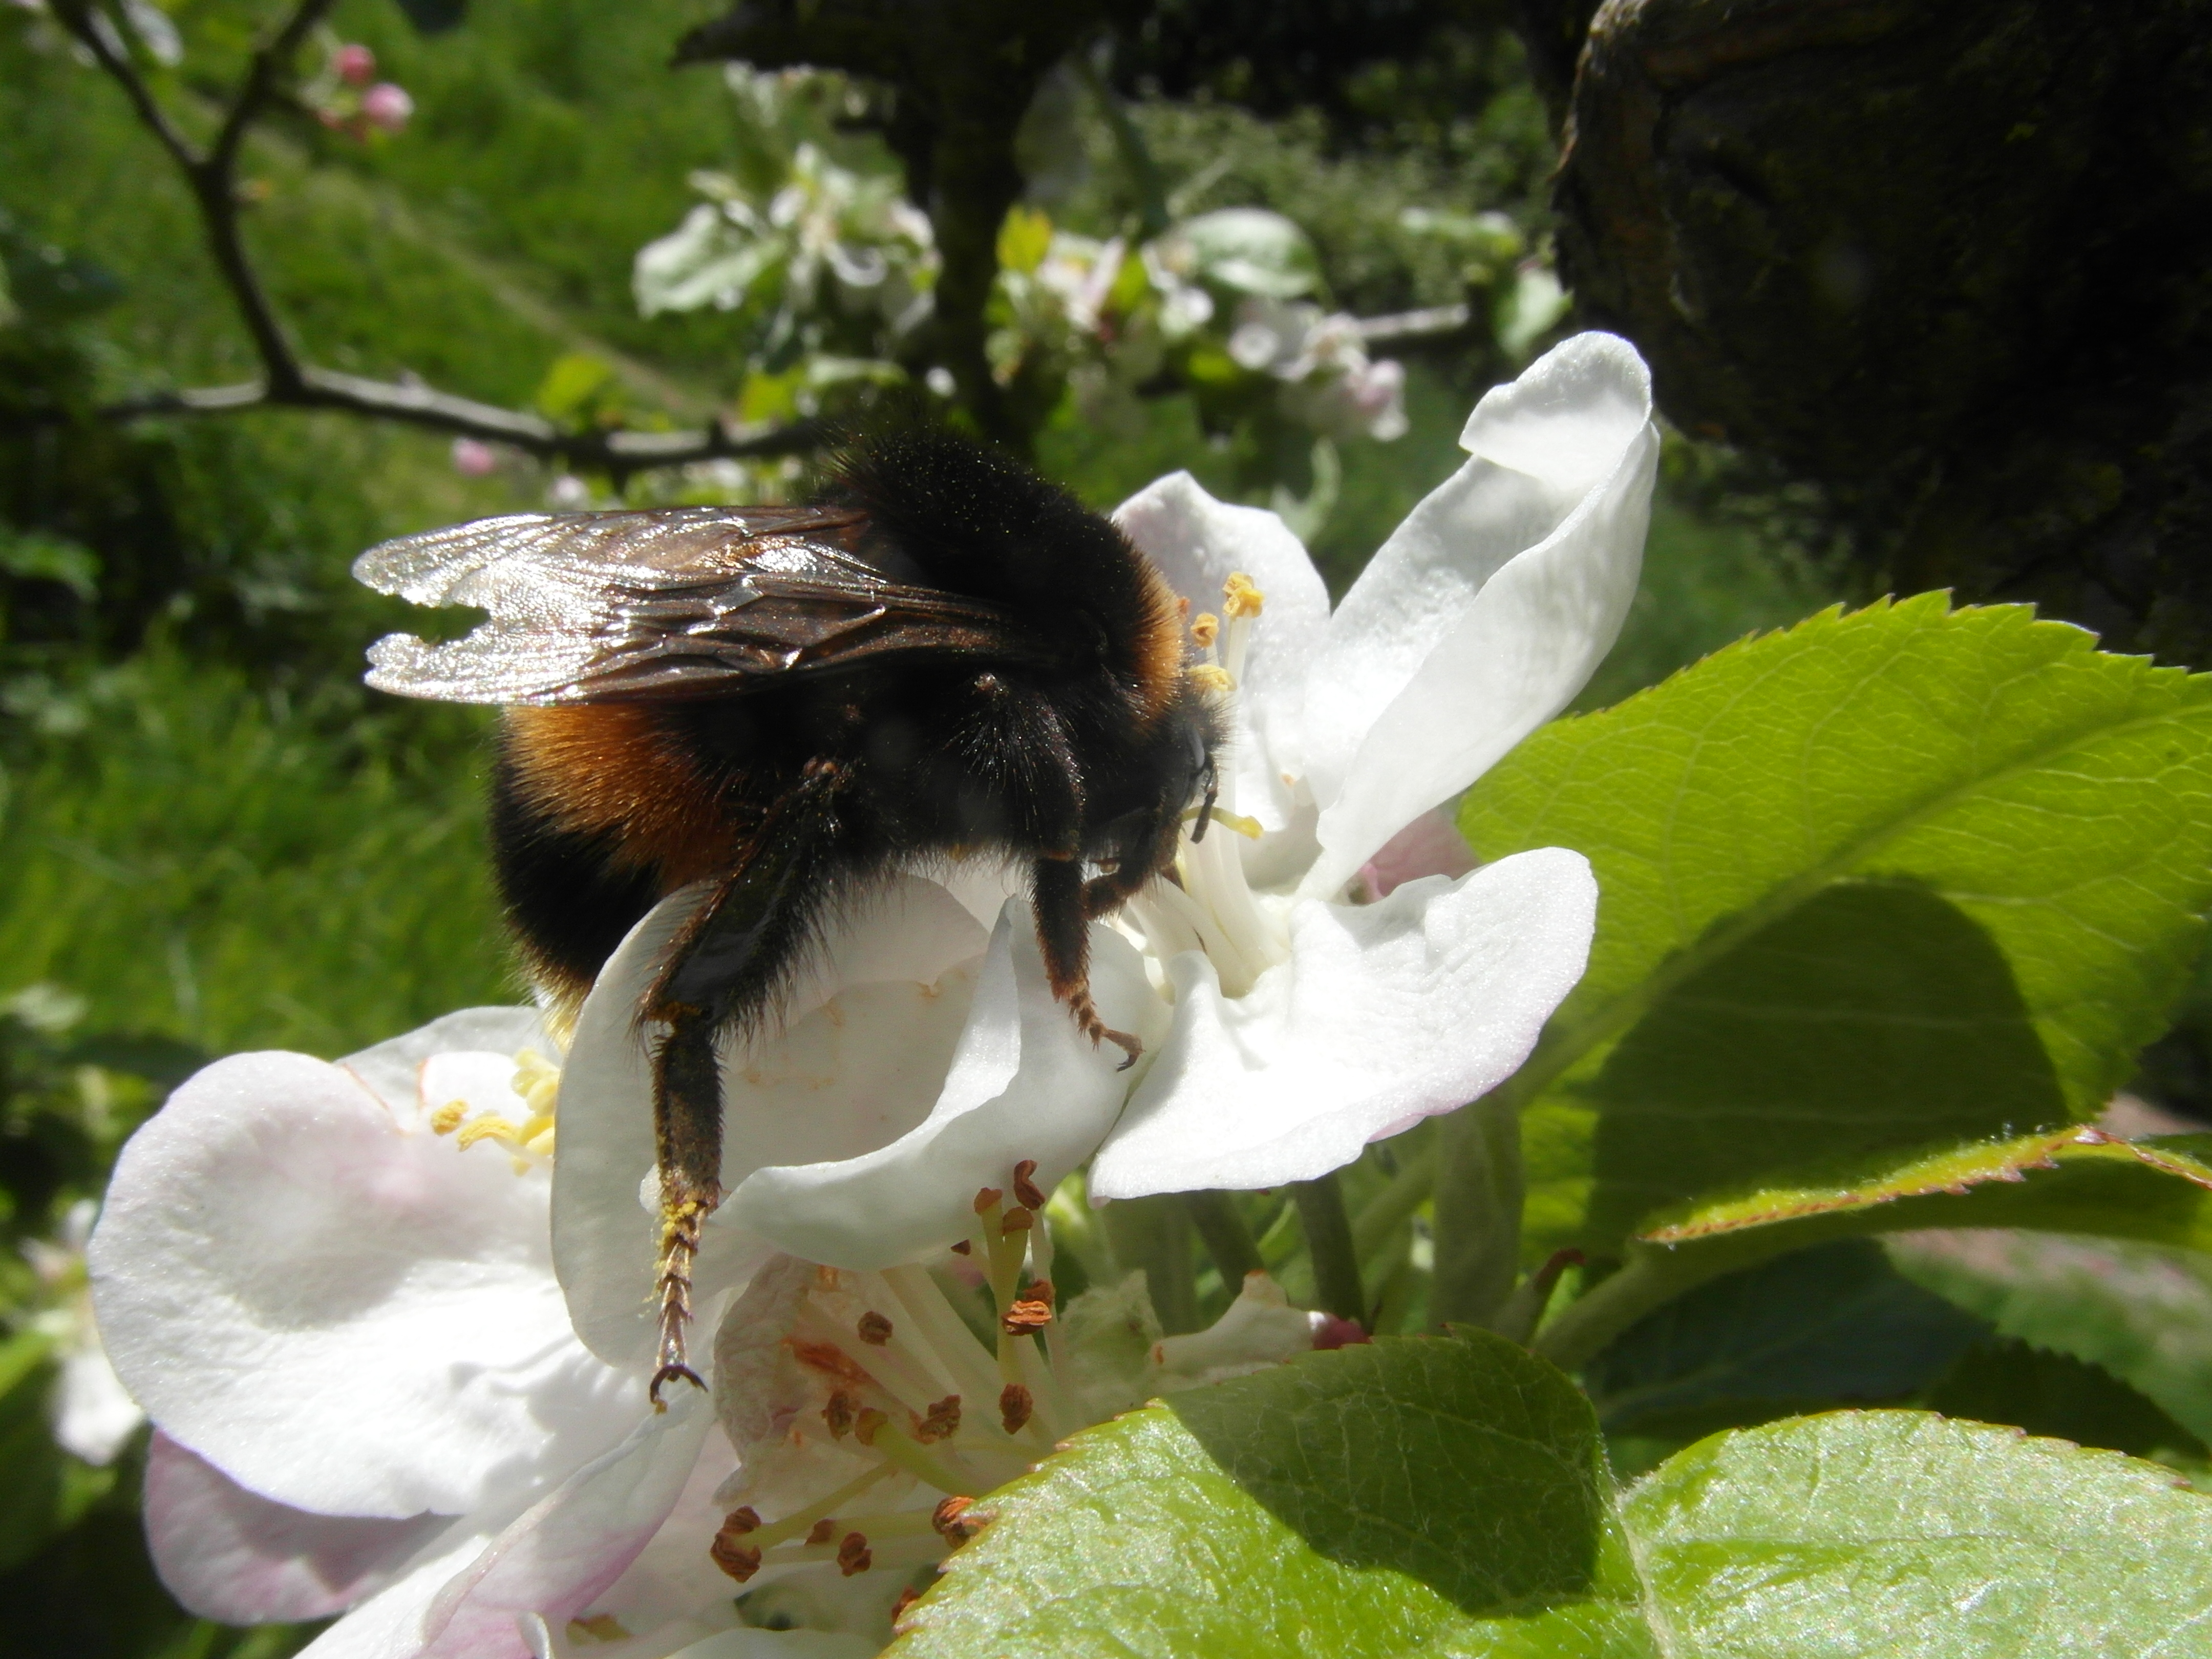 Bumblebee on apple blossom. Orchards biodiversity